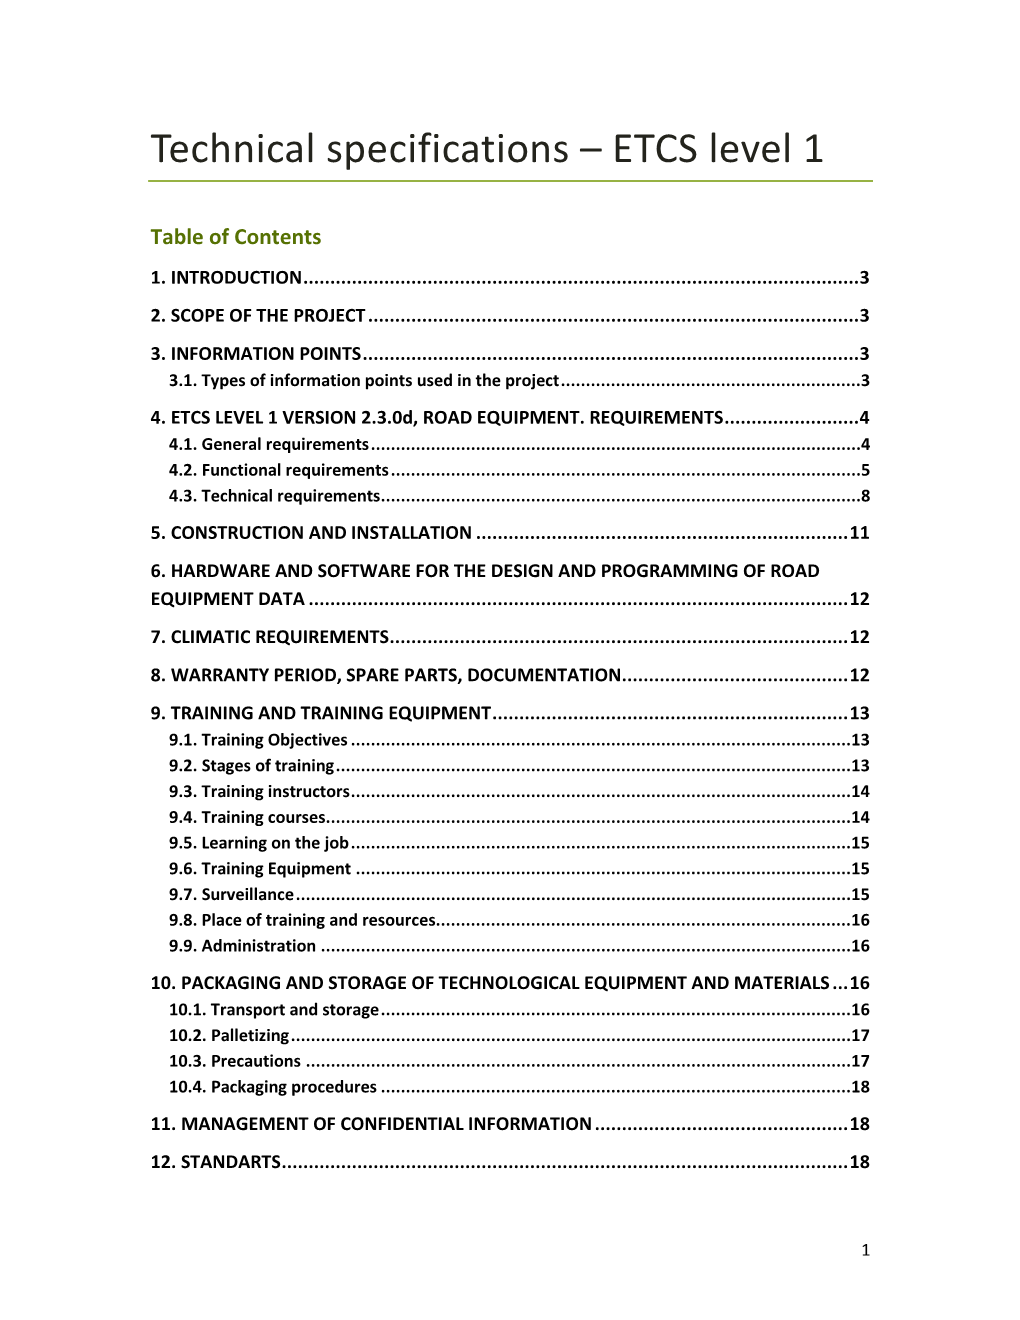 Technical Specifications – ETCS Level 1